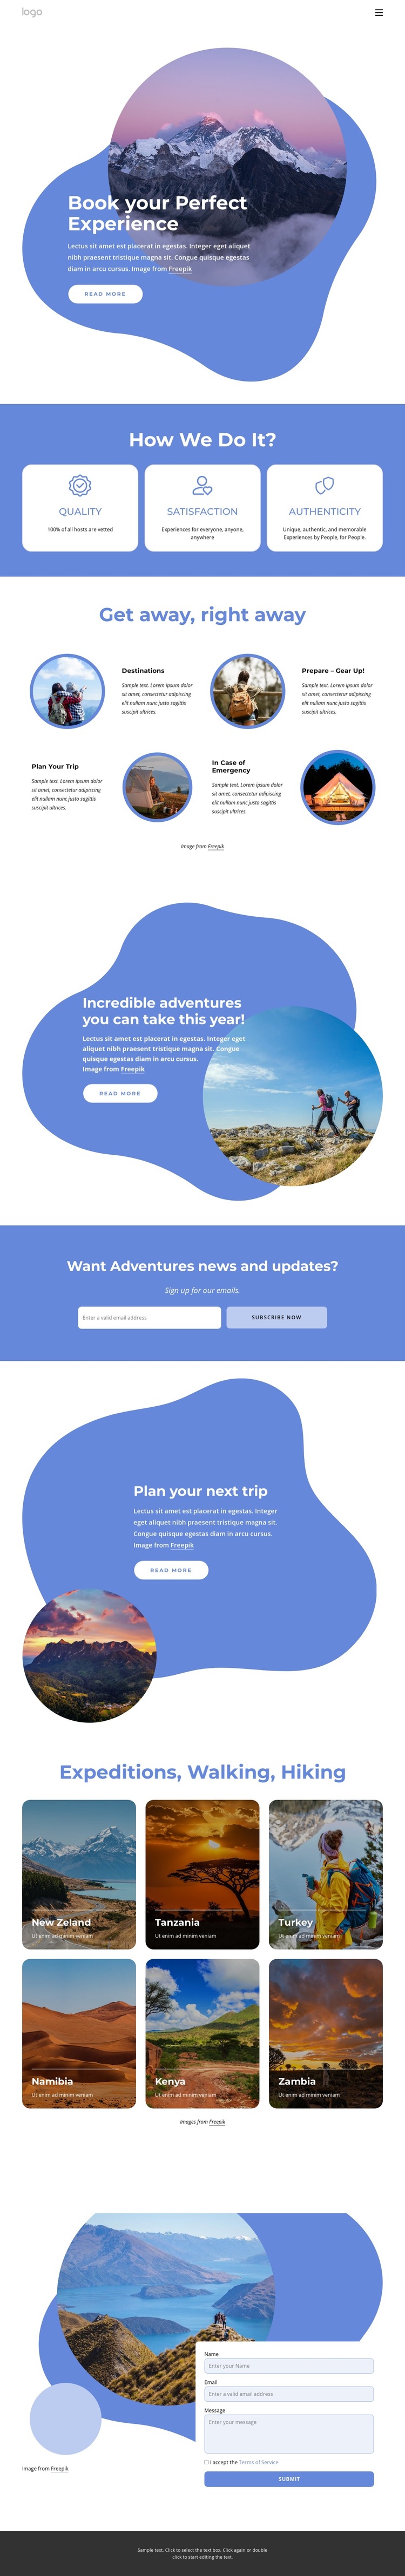 Book your perfect vacations HTML5 Template